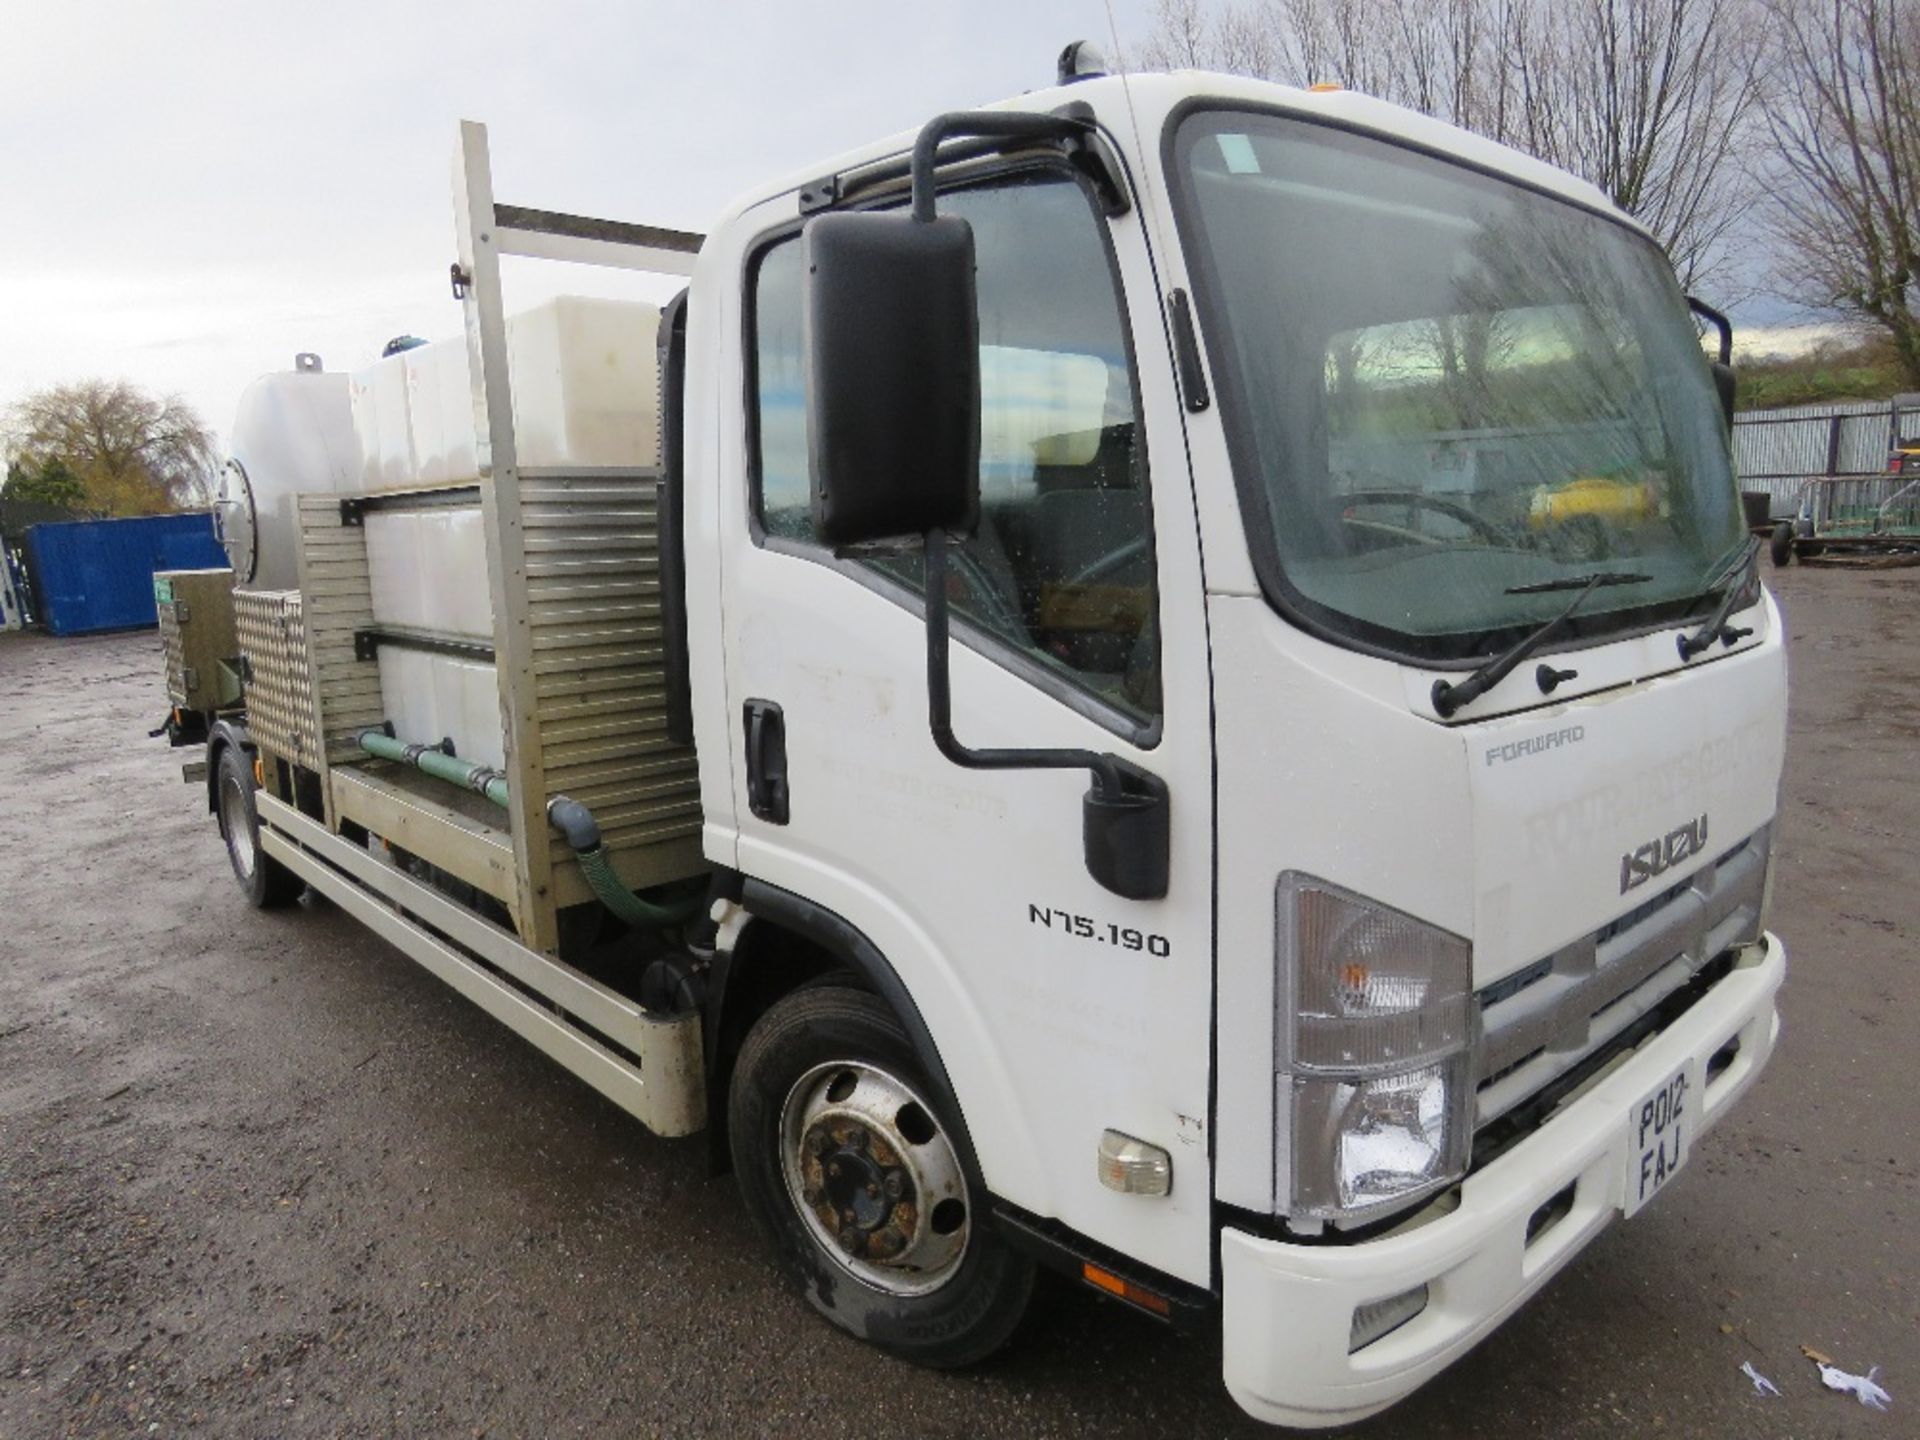 ISUZU 7500KG PORTABLE TOILET SERVICE TRUCK REG:PO12 FAJ. WITH V5, OWNED FROM NEW, 70,521REC MILES.